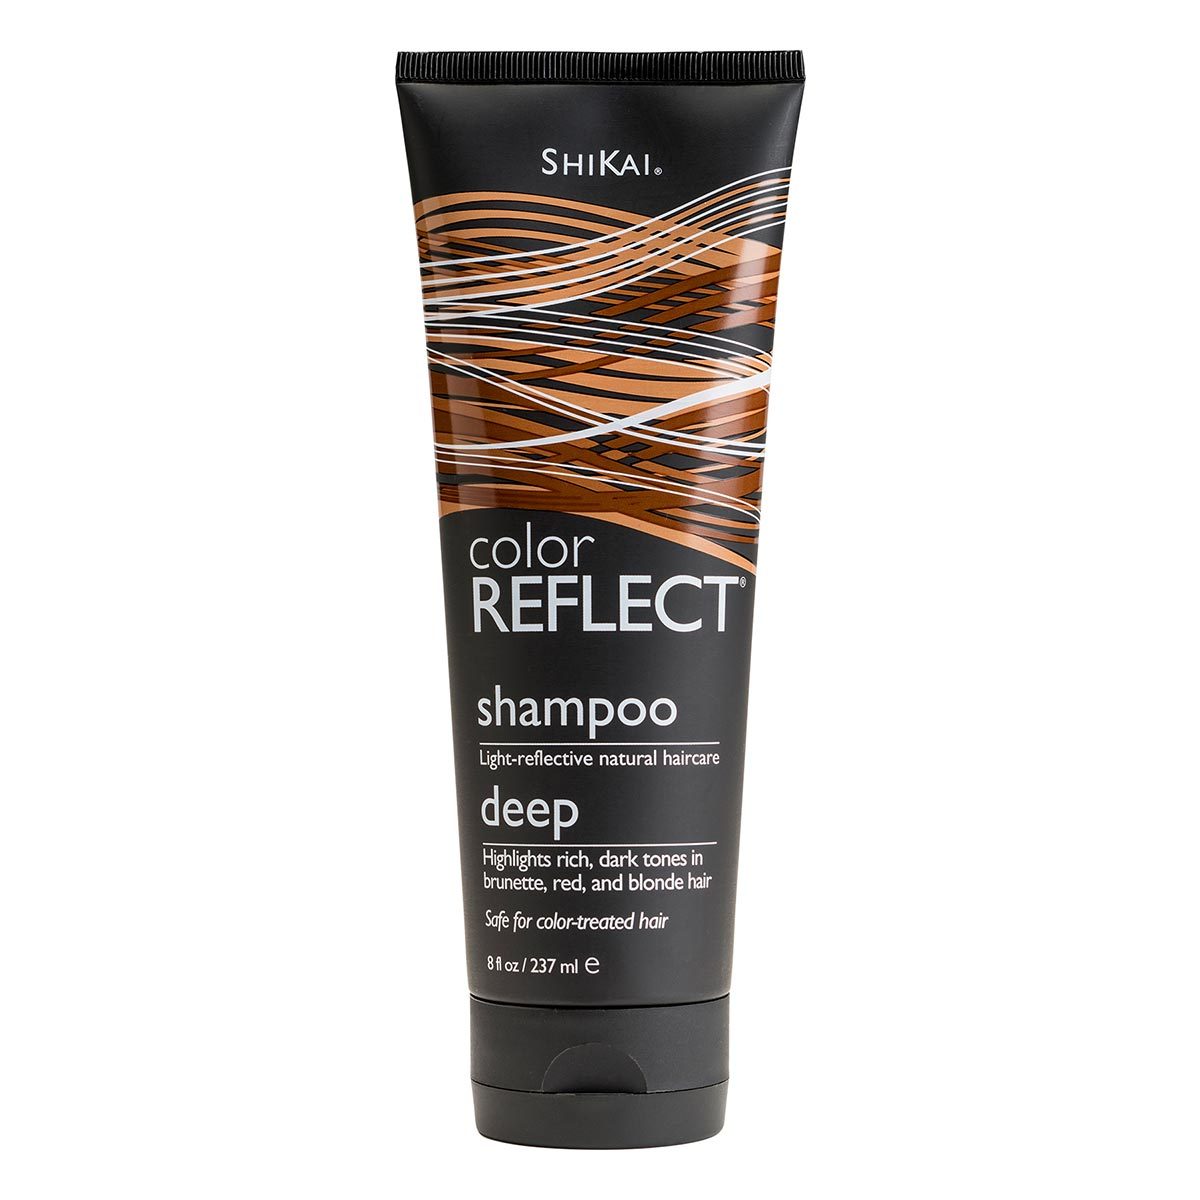 Primary image of Color Reflect Deep Shampoo